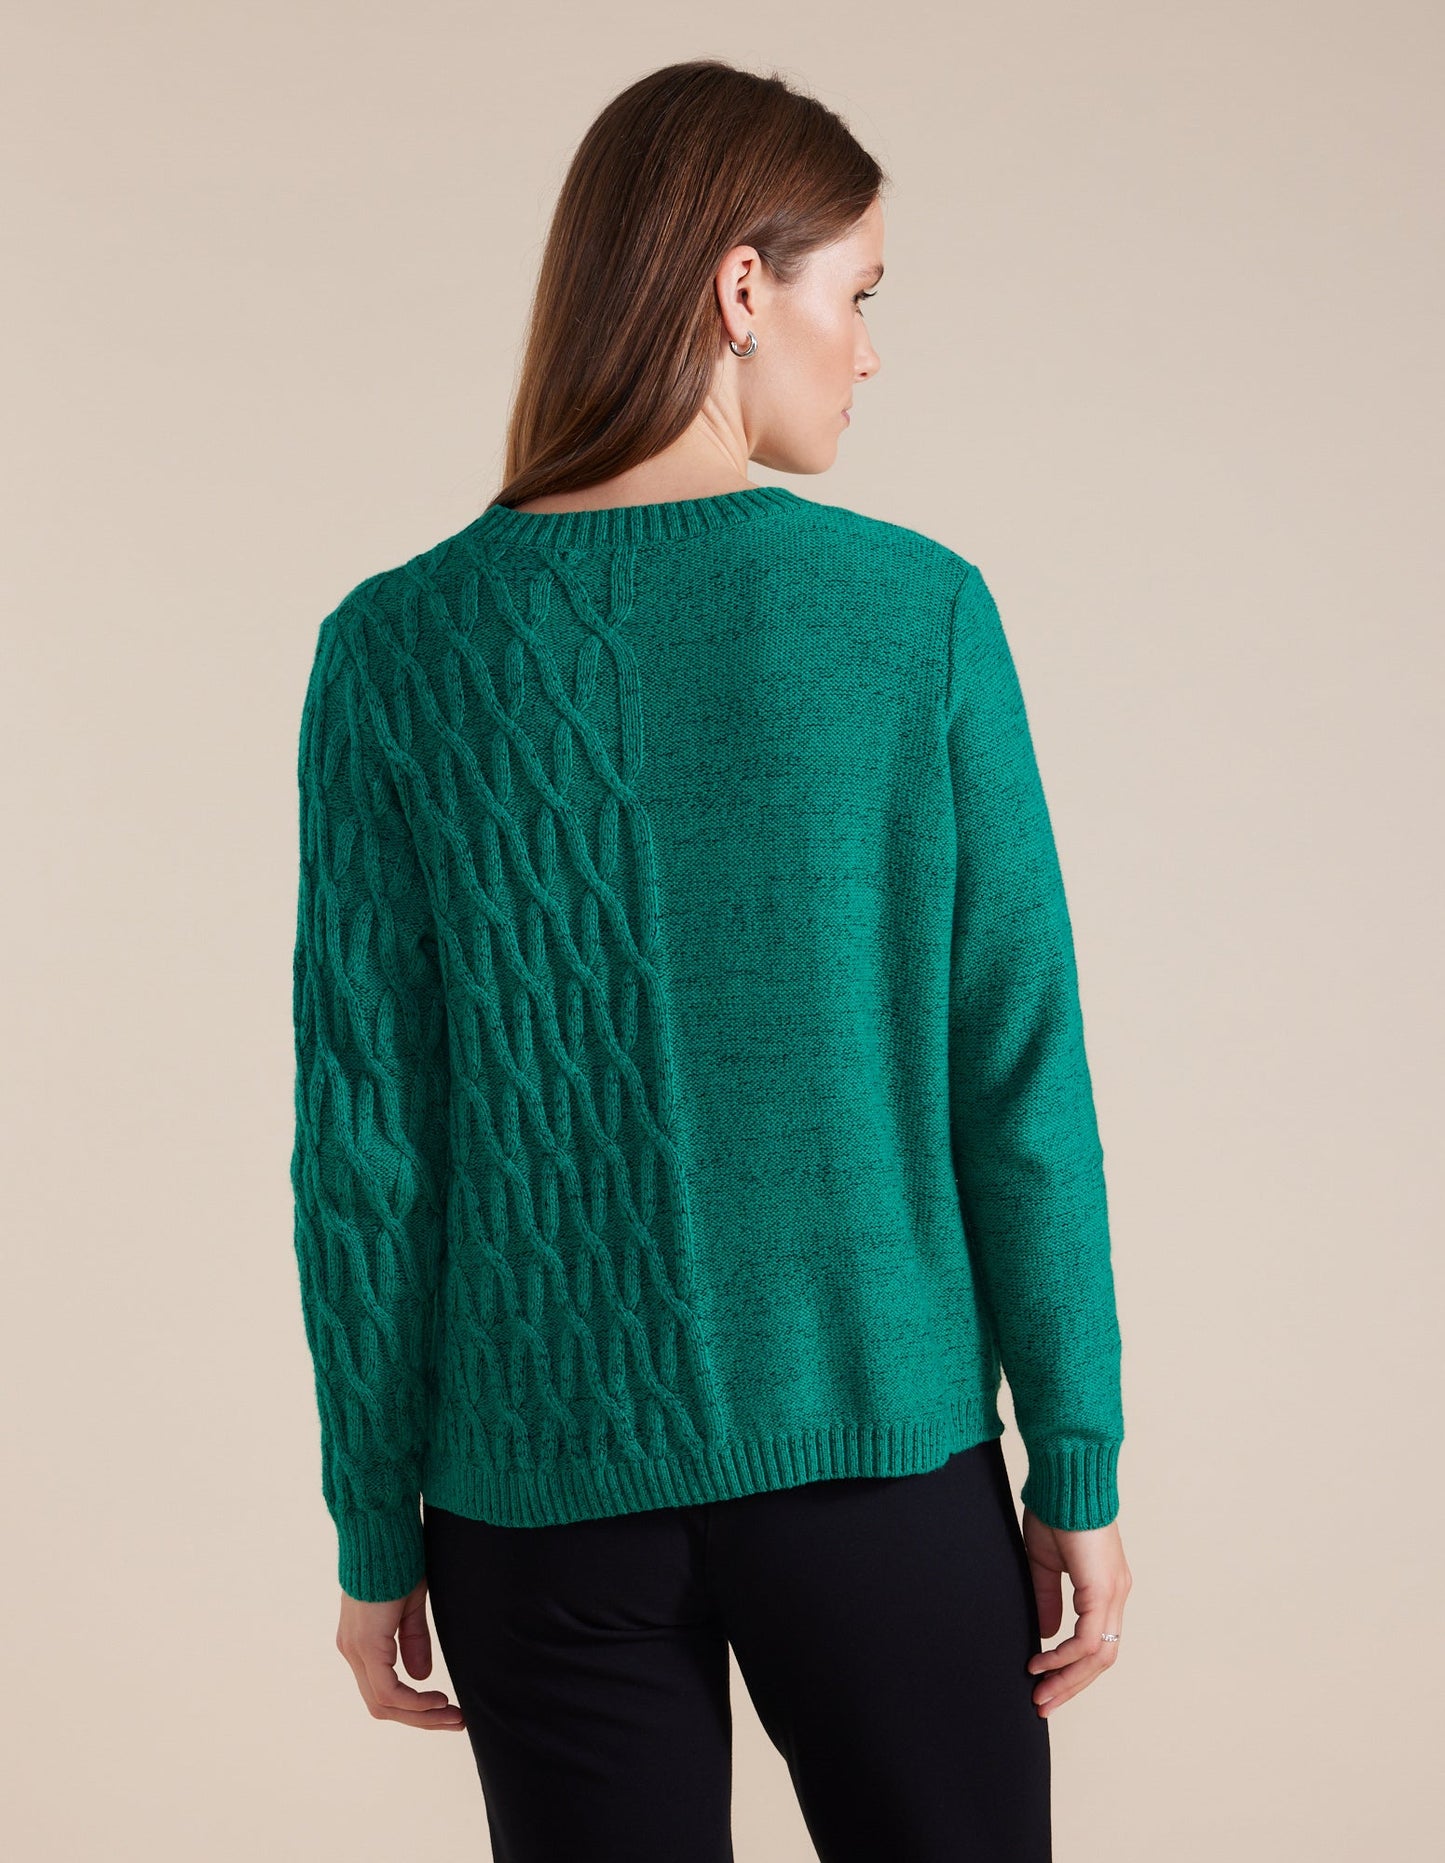 MARCO POLO L/S CABLE KNIT - FOREST - THE VOGUE STORE